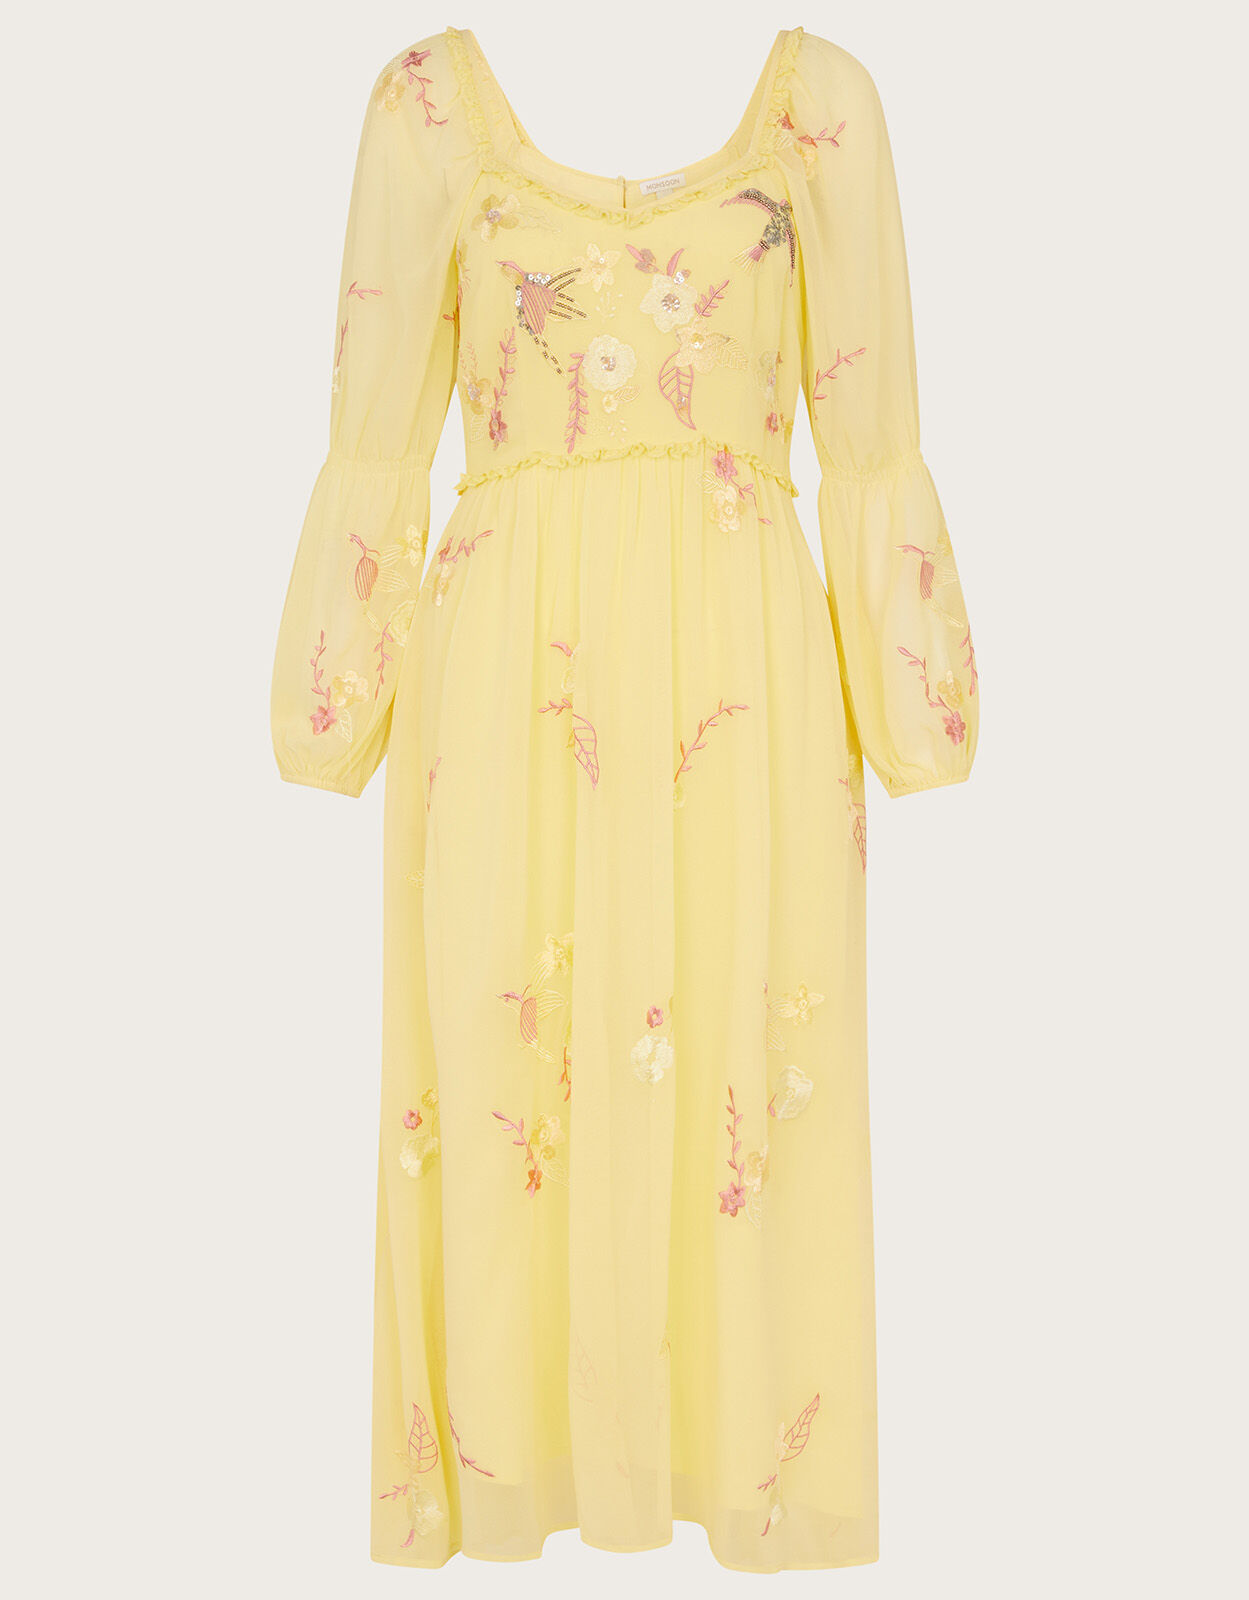 Heidi Embellished Midi Dress in Recycled Polyester Yellow